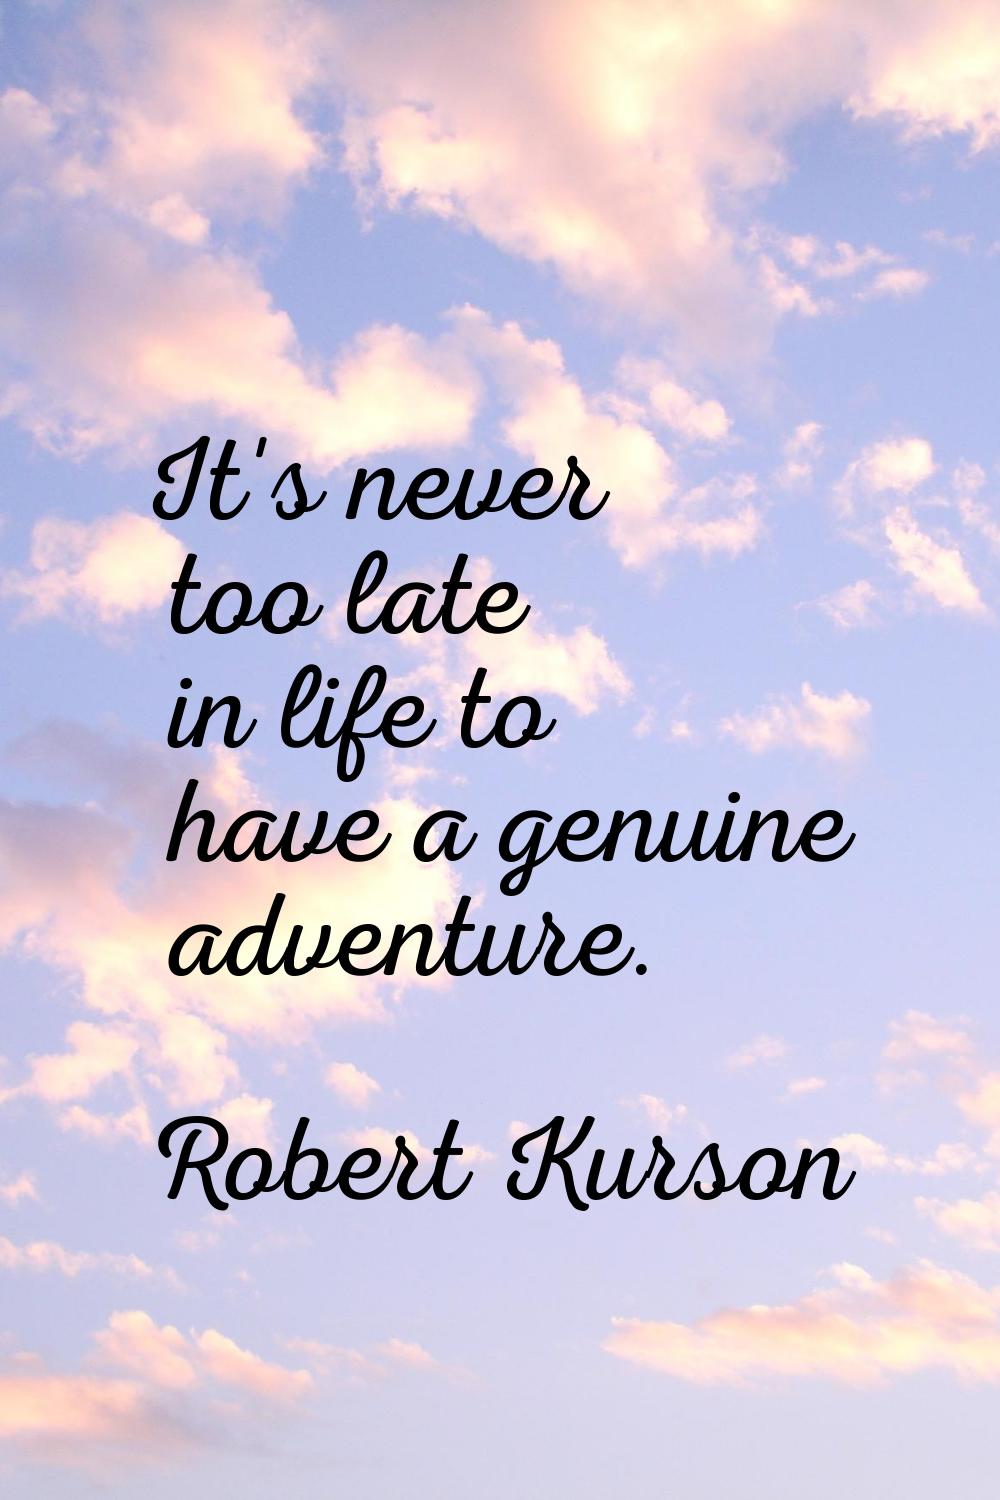 It's never too late in life to have a genuine adventure.